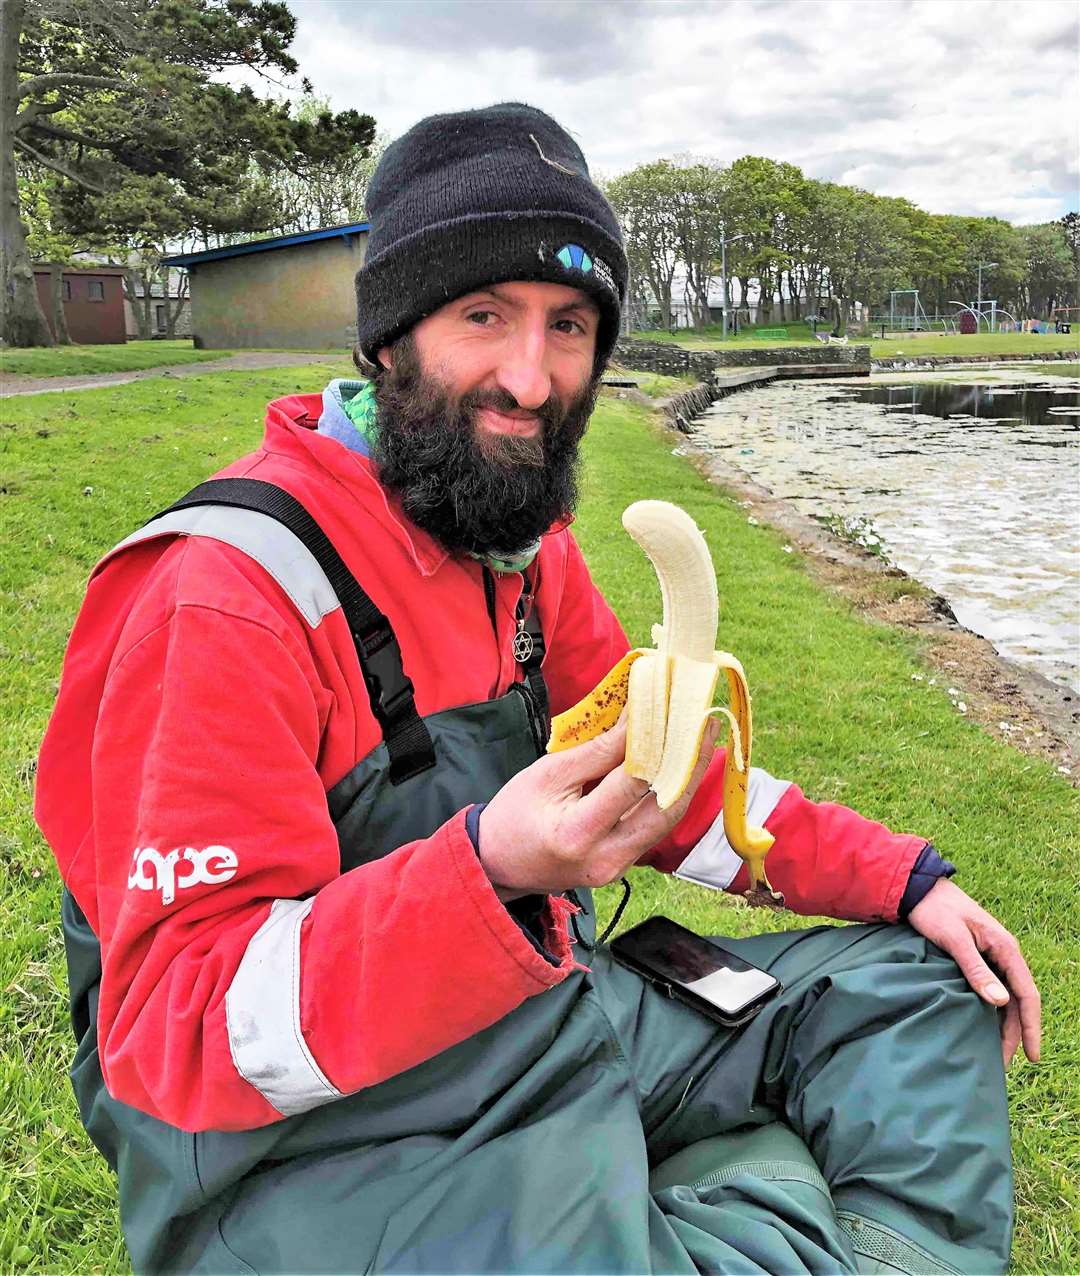 'I'm not bananas,' said Thurso activist Alexander Glasgow. 'These are serious matters that need addressed'.